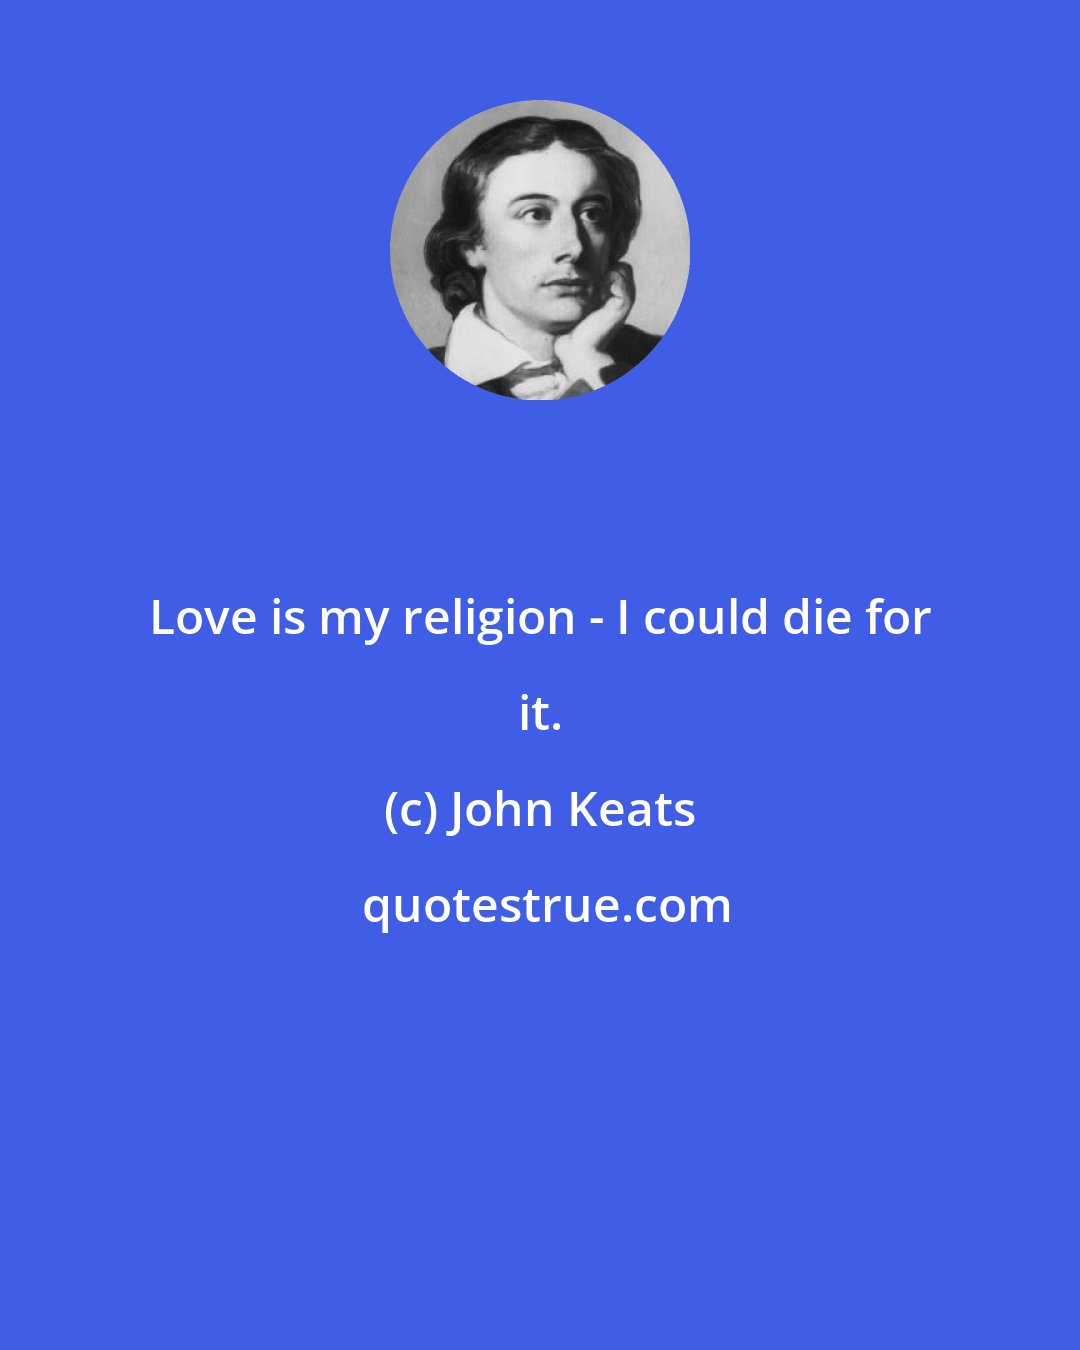 John Keats: Love is my religion - I could die for it.